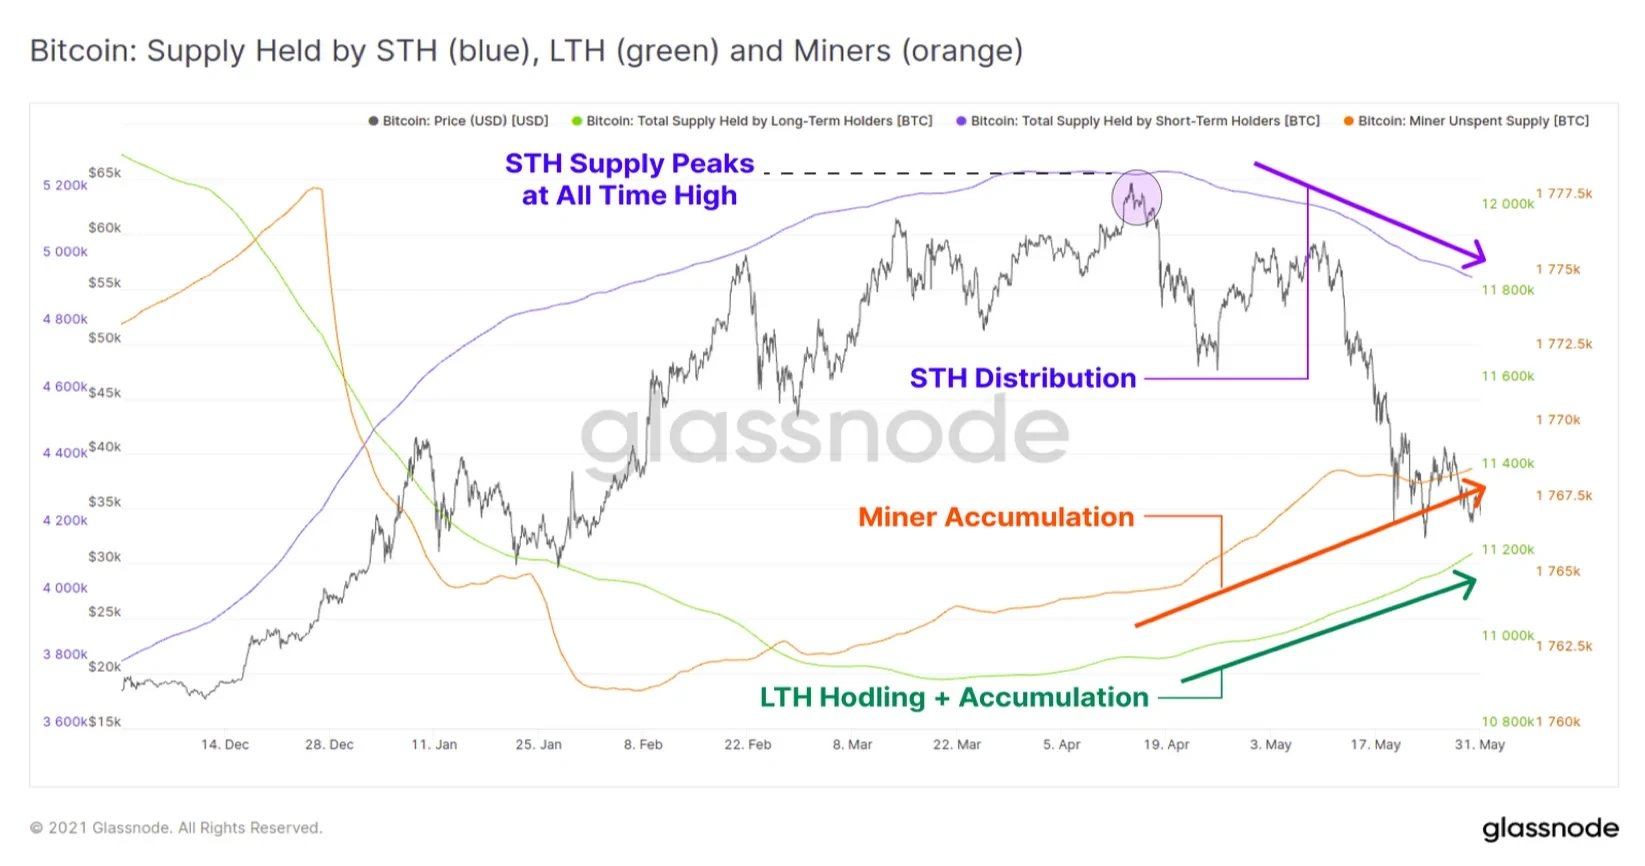 Supply Held by STH, LTH, and Miners